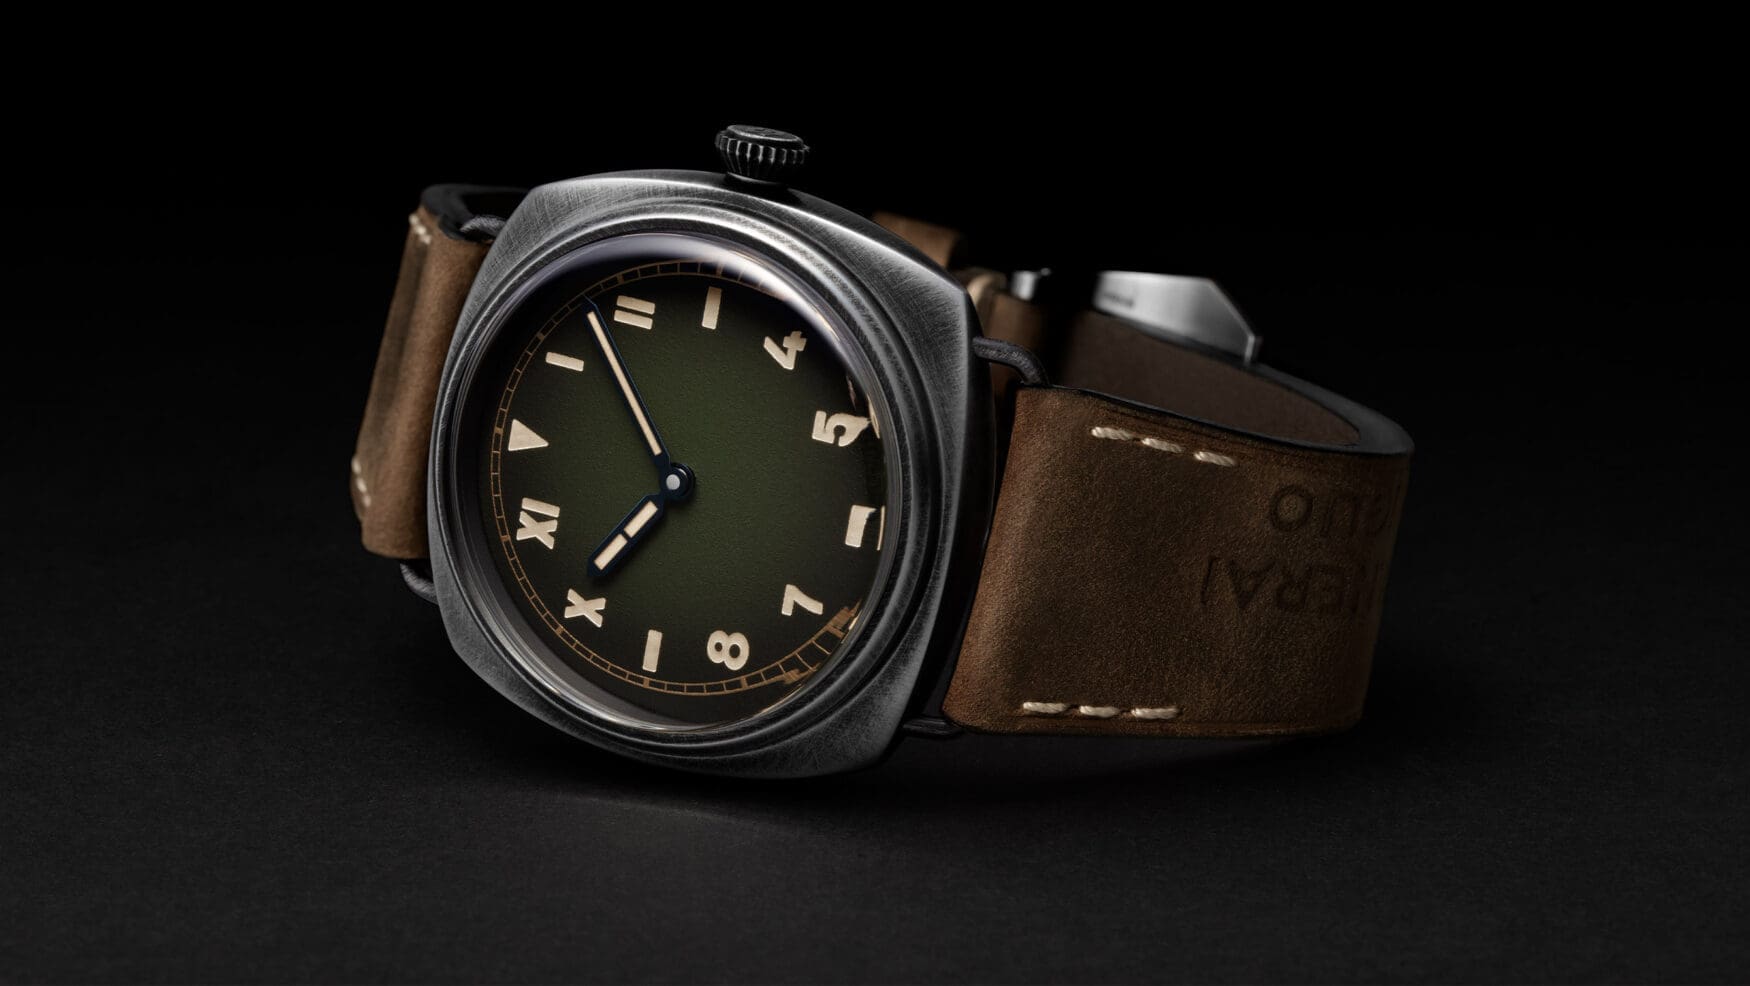 The Panerai Radiomir California offers a more compact take on their classic dial